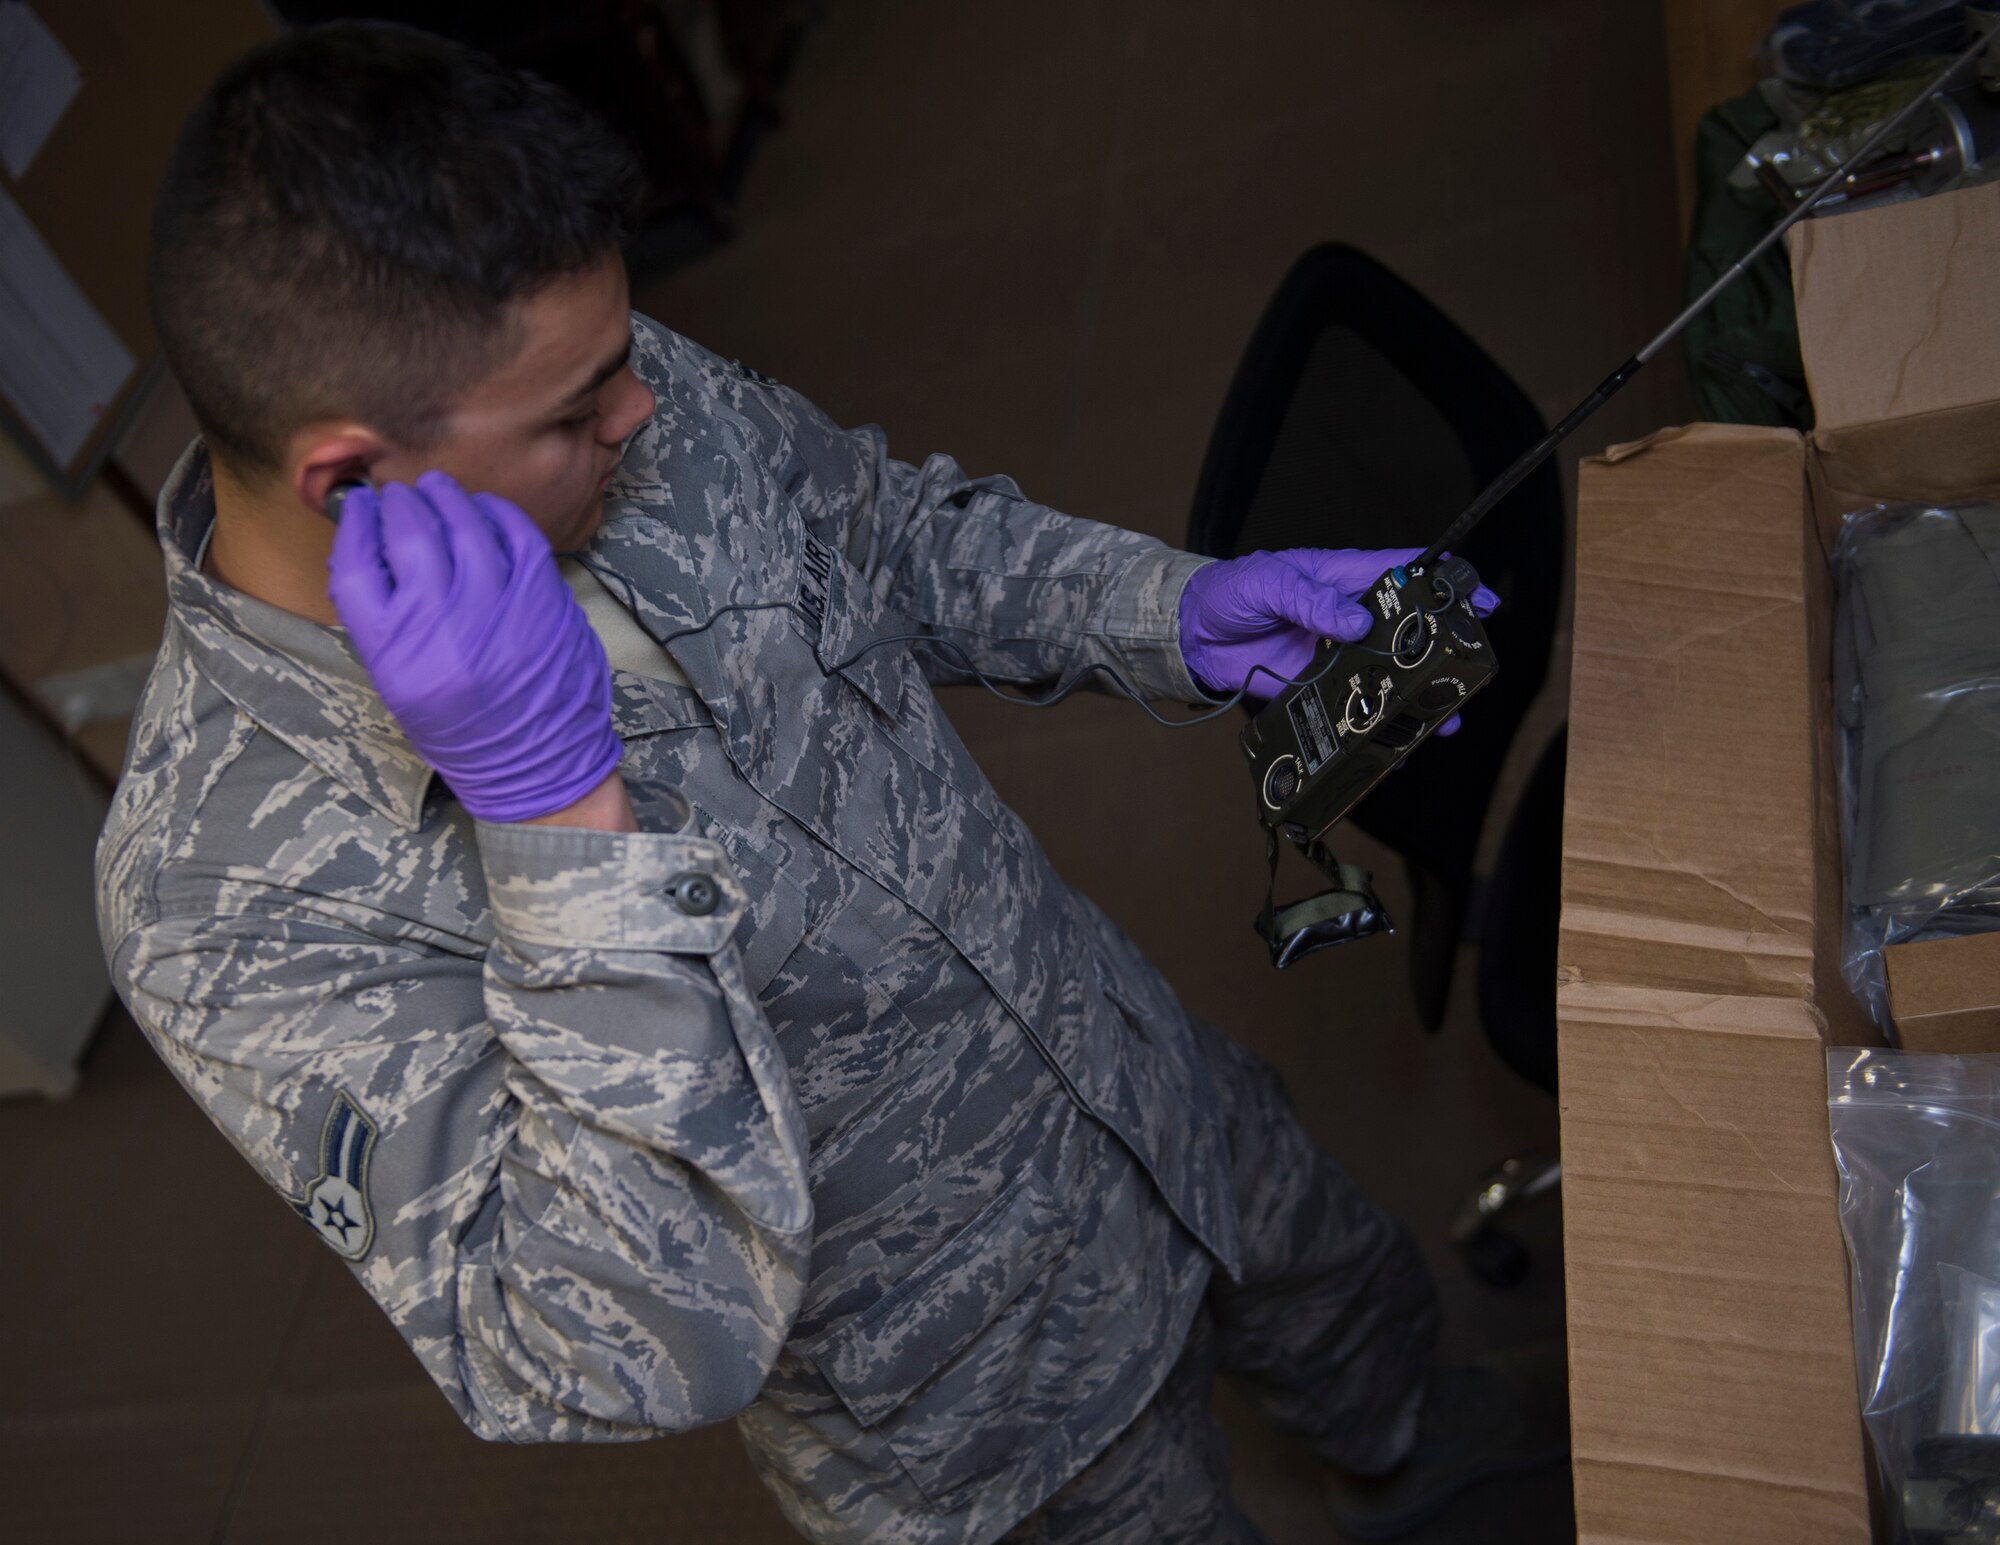 U.S. Air Force Airman 1st Class Dallas Galvan, an aircrew flight equipment technician with the 379th Expeditionary Operational Support Squadron, conducts a function check on a PRC-90 radio at Al Udeid Air Base, Qatar May 16, 2017. The PRC-90 radio is one of many items located within aircrew survival equipment kit that can help aircrew members return safely if they become isolated. (U.S. Air Force photo by Tech. Sgt. Amy M. Lovgren)